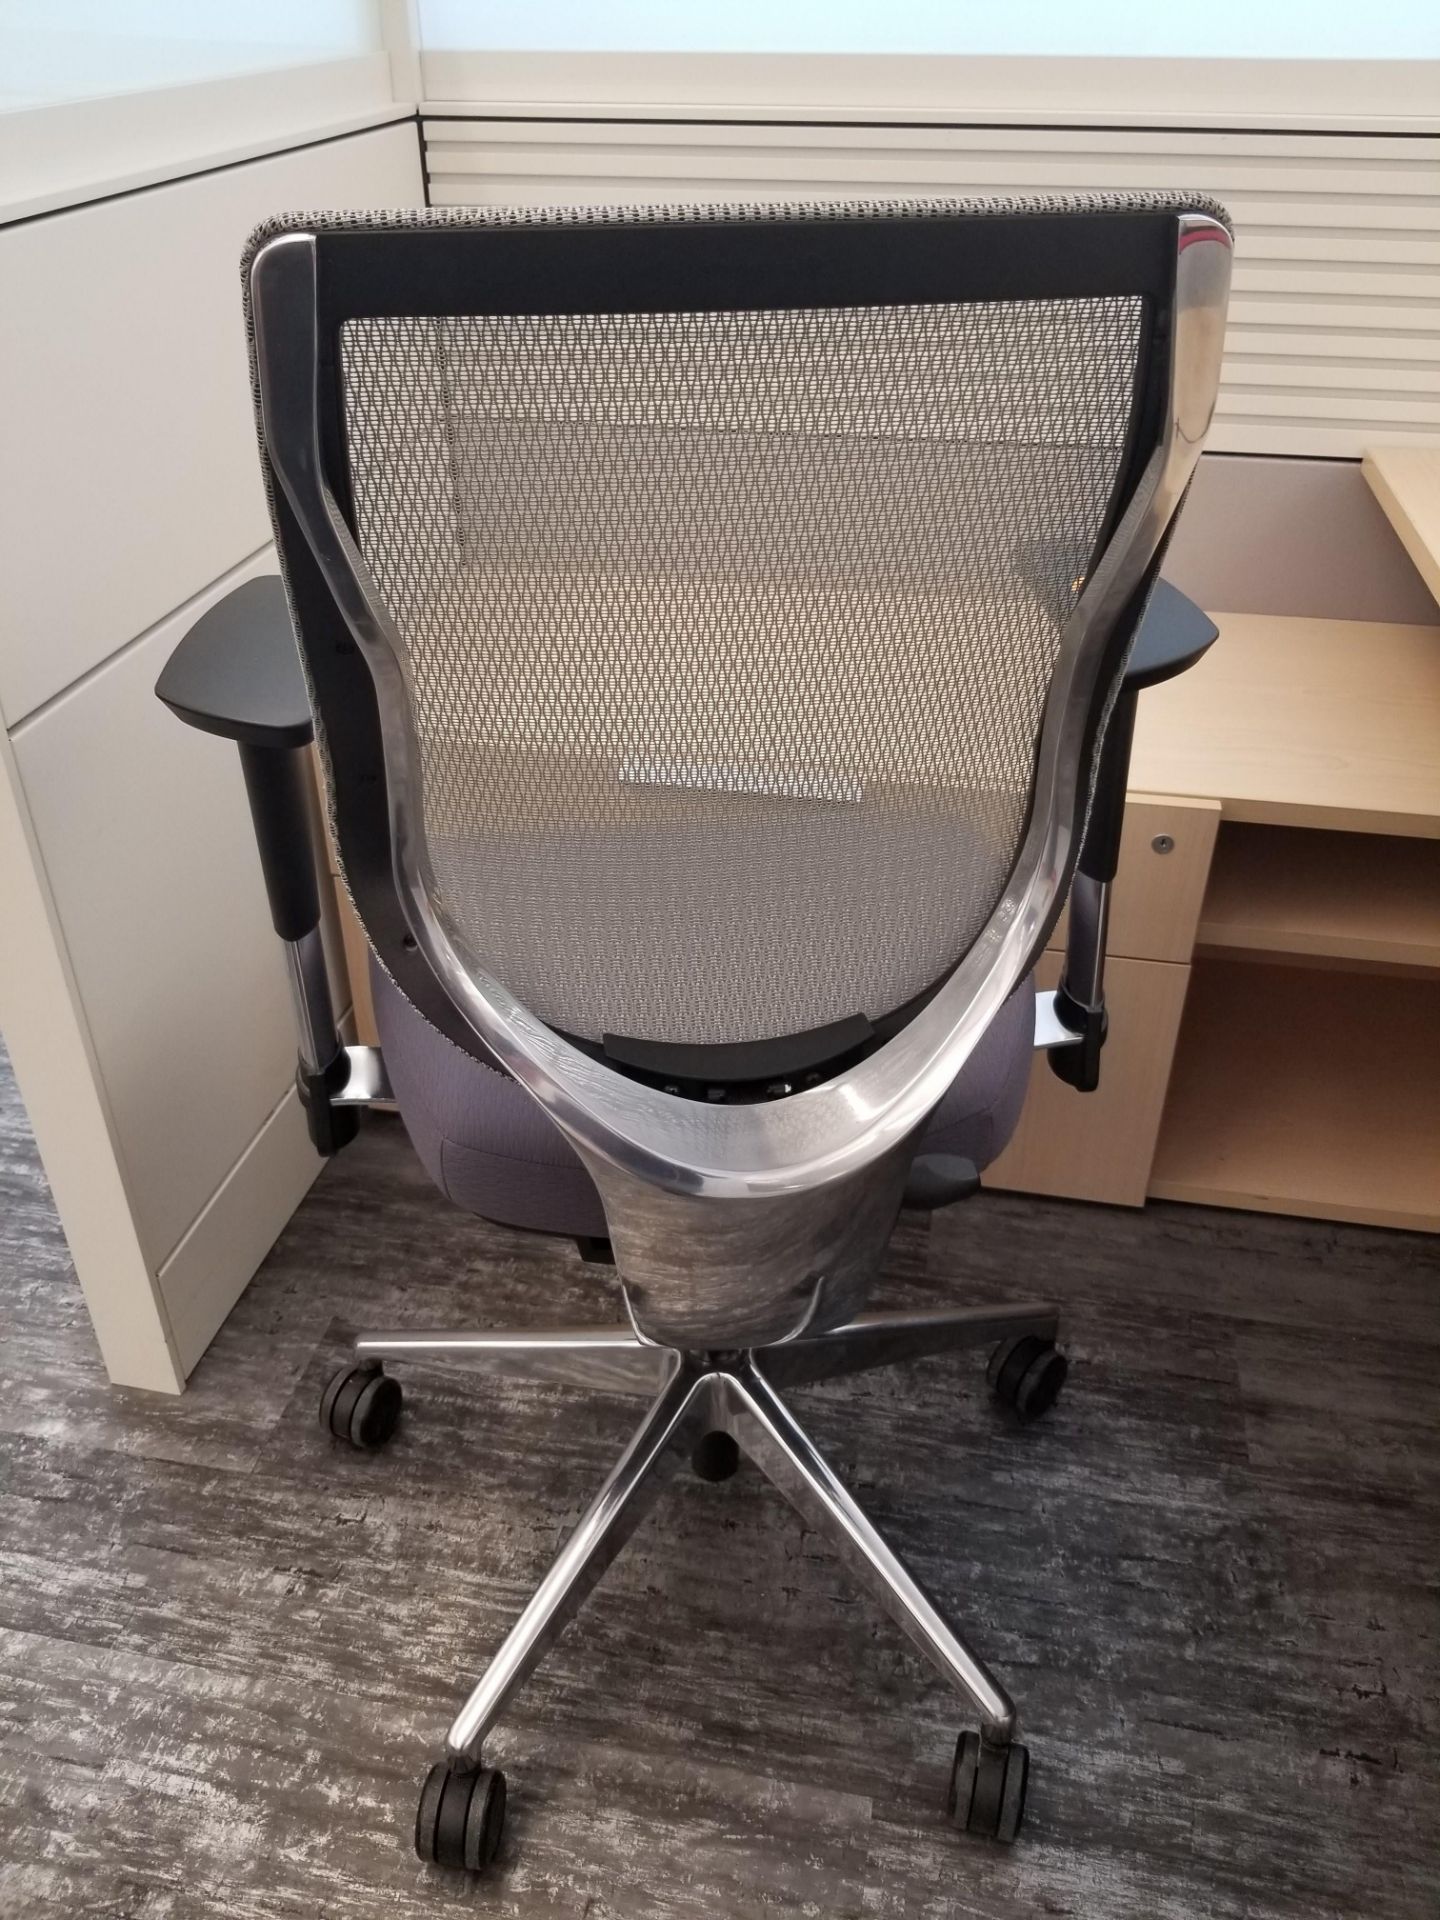 ALLSEATING - EXEC. CHAIR ON CASTERS, GREY W/ MESH BACK, ADJUSTABLE HEIGHT, ADJUSTABLE ARMS - Image 3 of 6